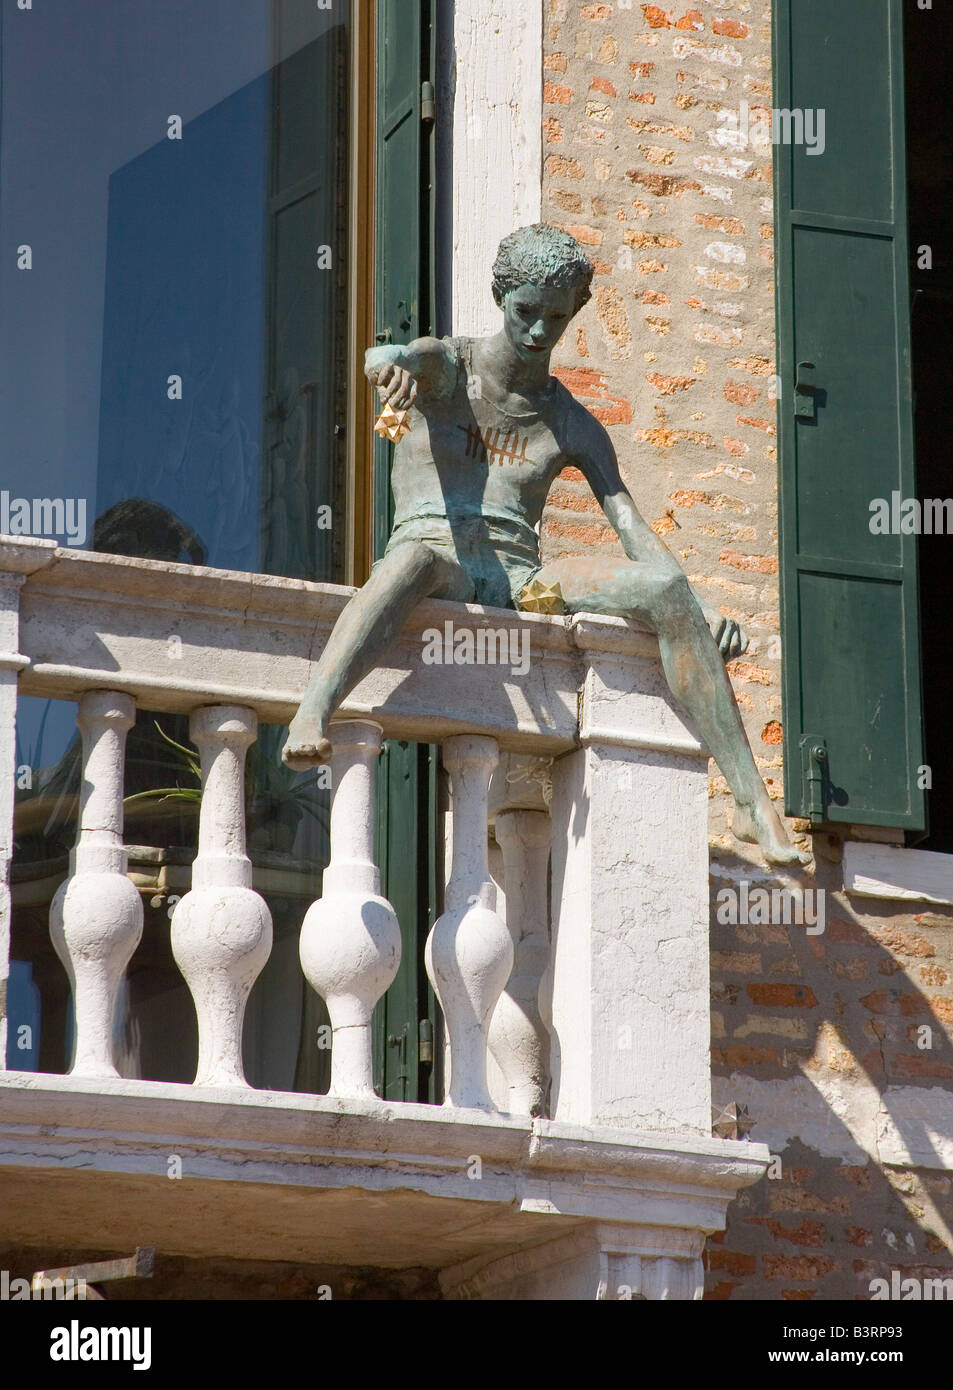 Sculpture of a young boy on a balcony in Venice Italy Stock Photo